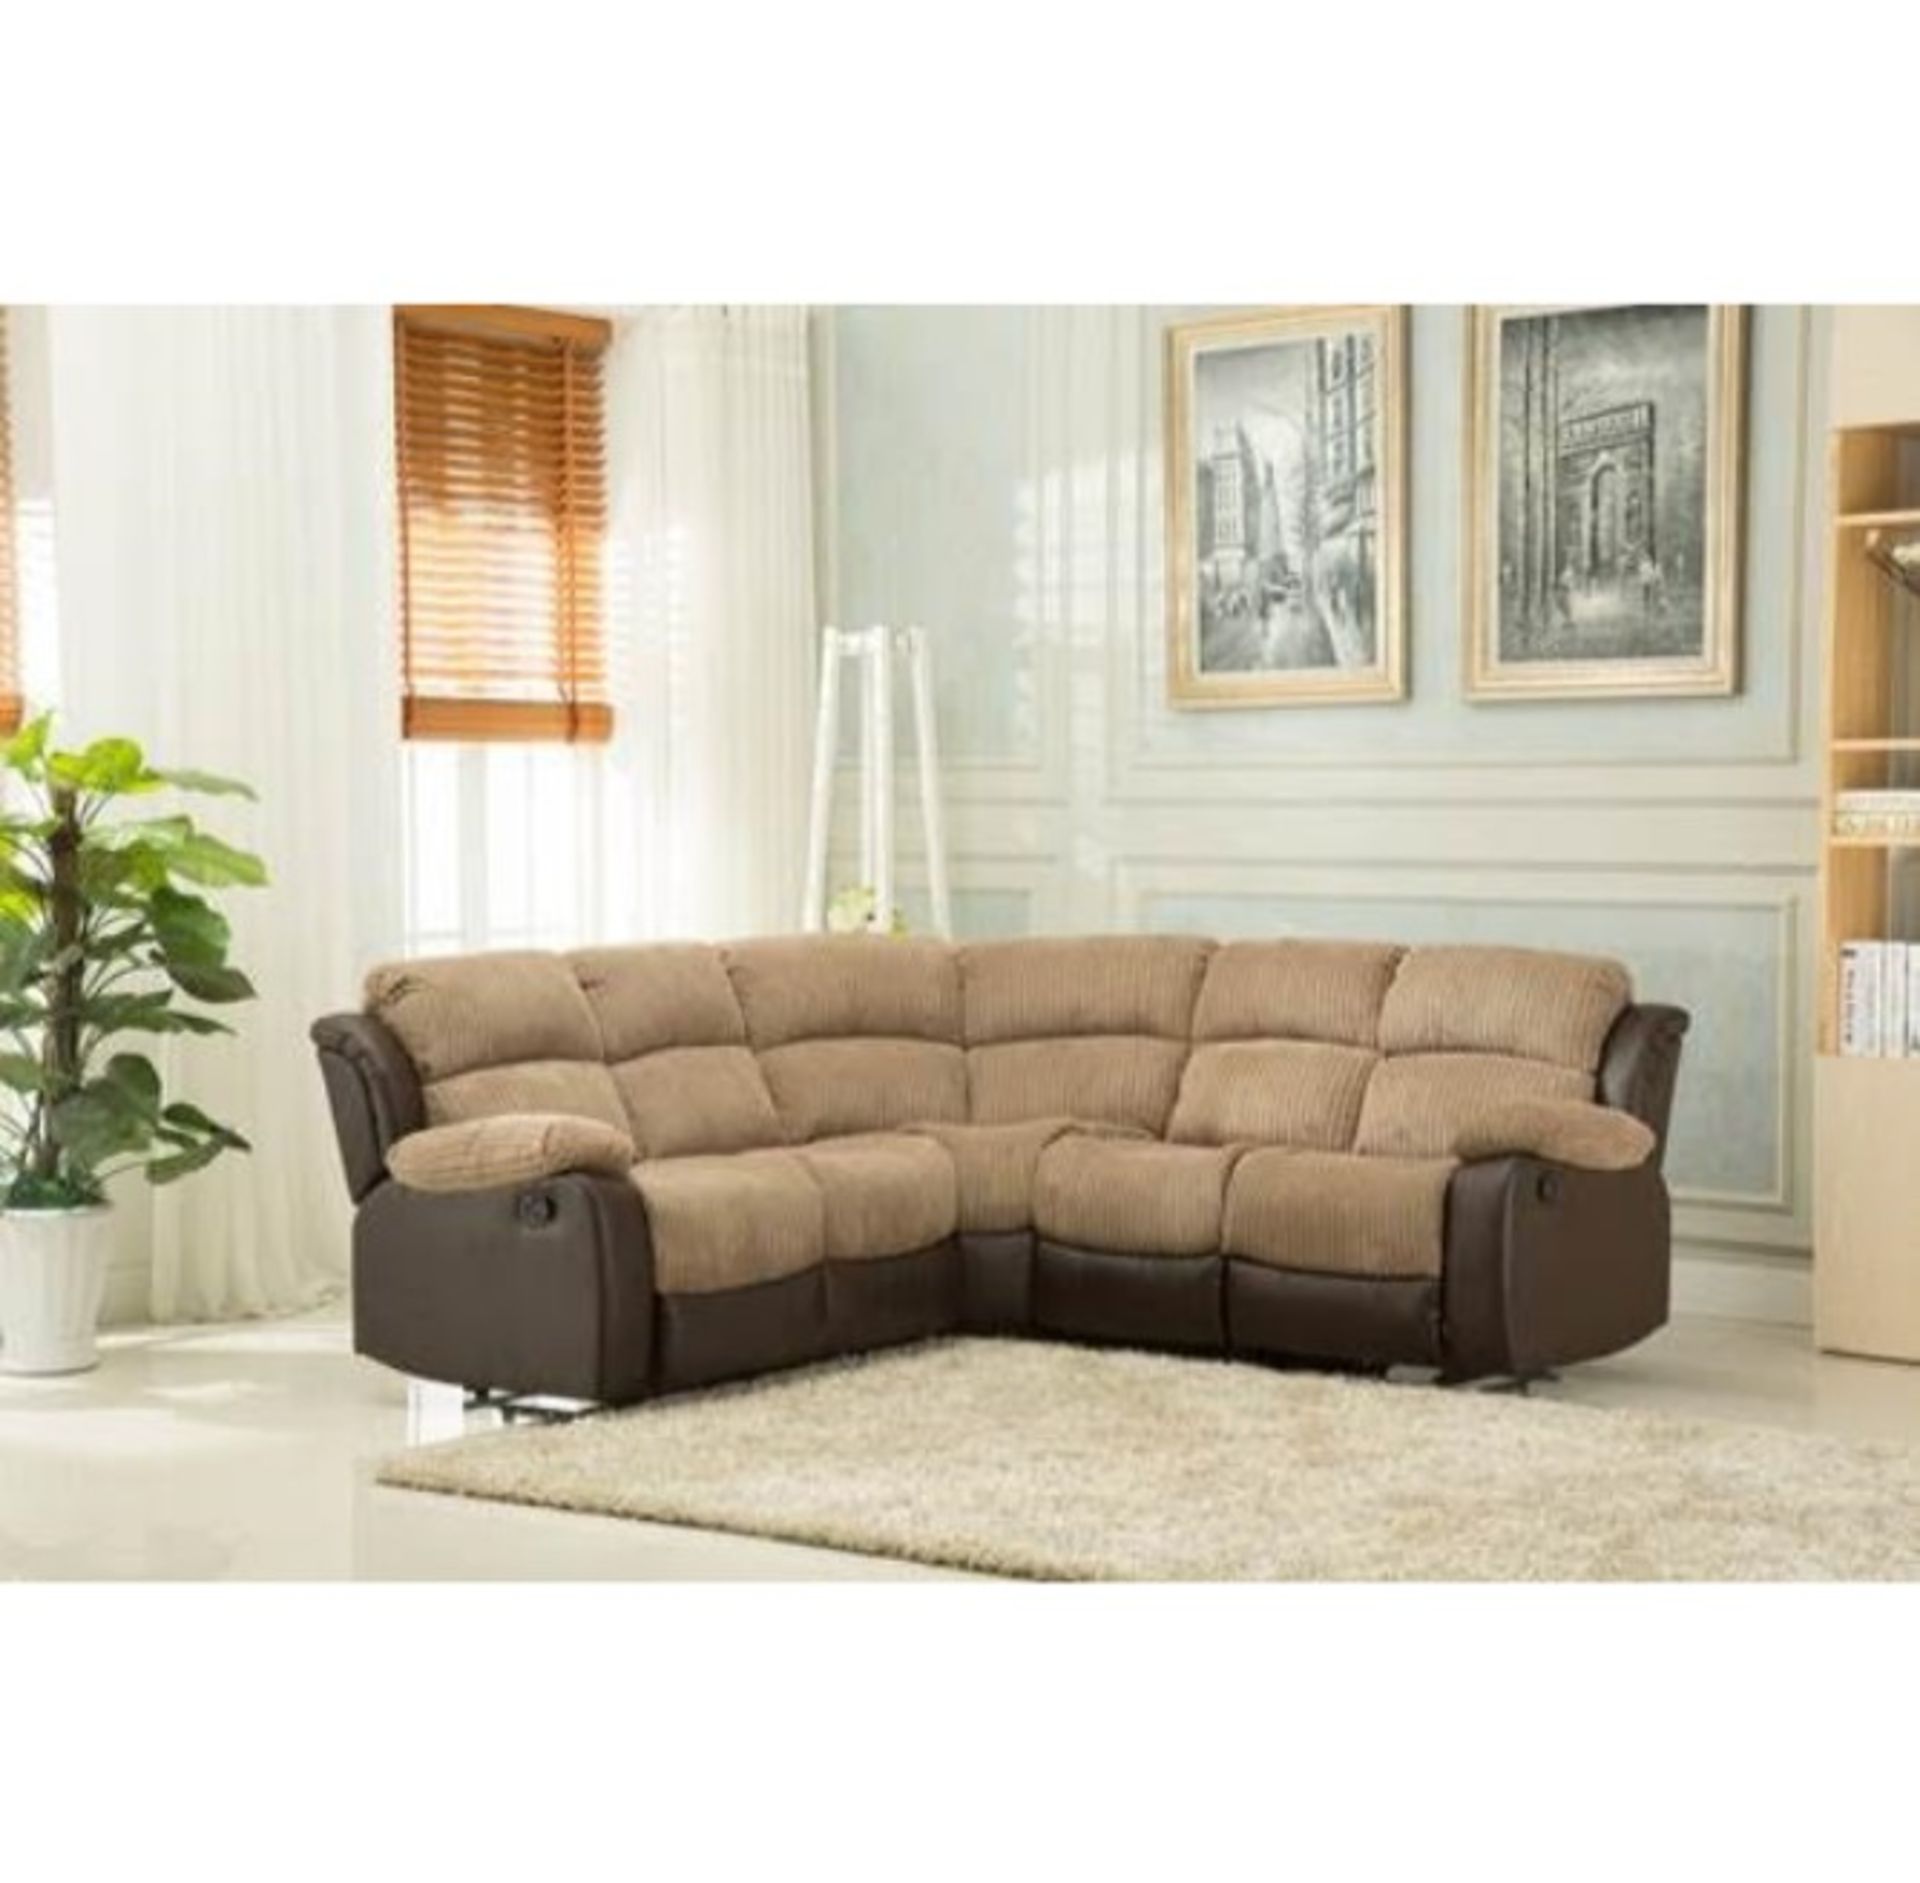 Brand new boxed montana corner sofa in brown leather and moccha cord